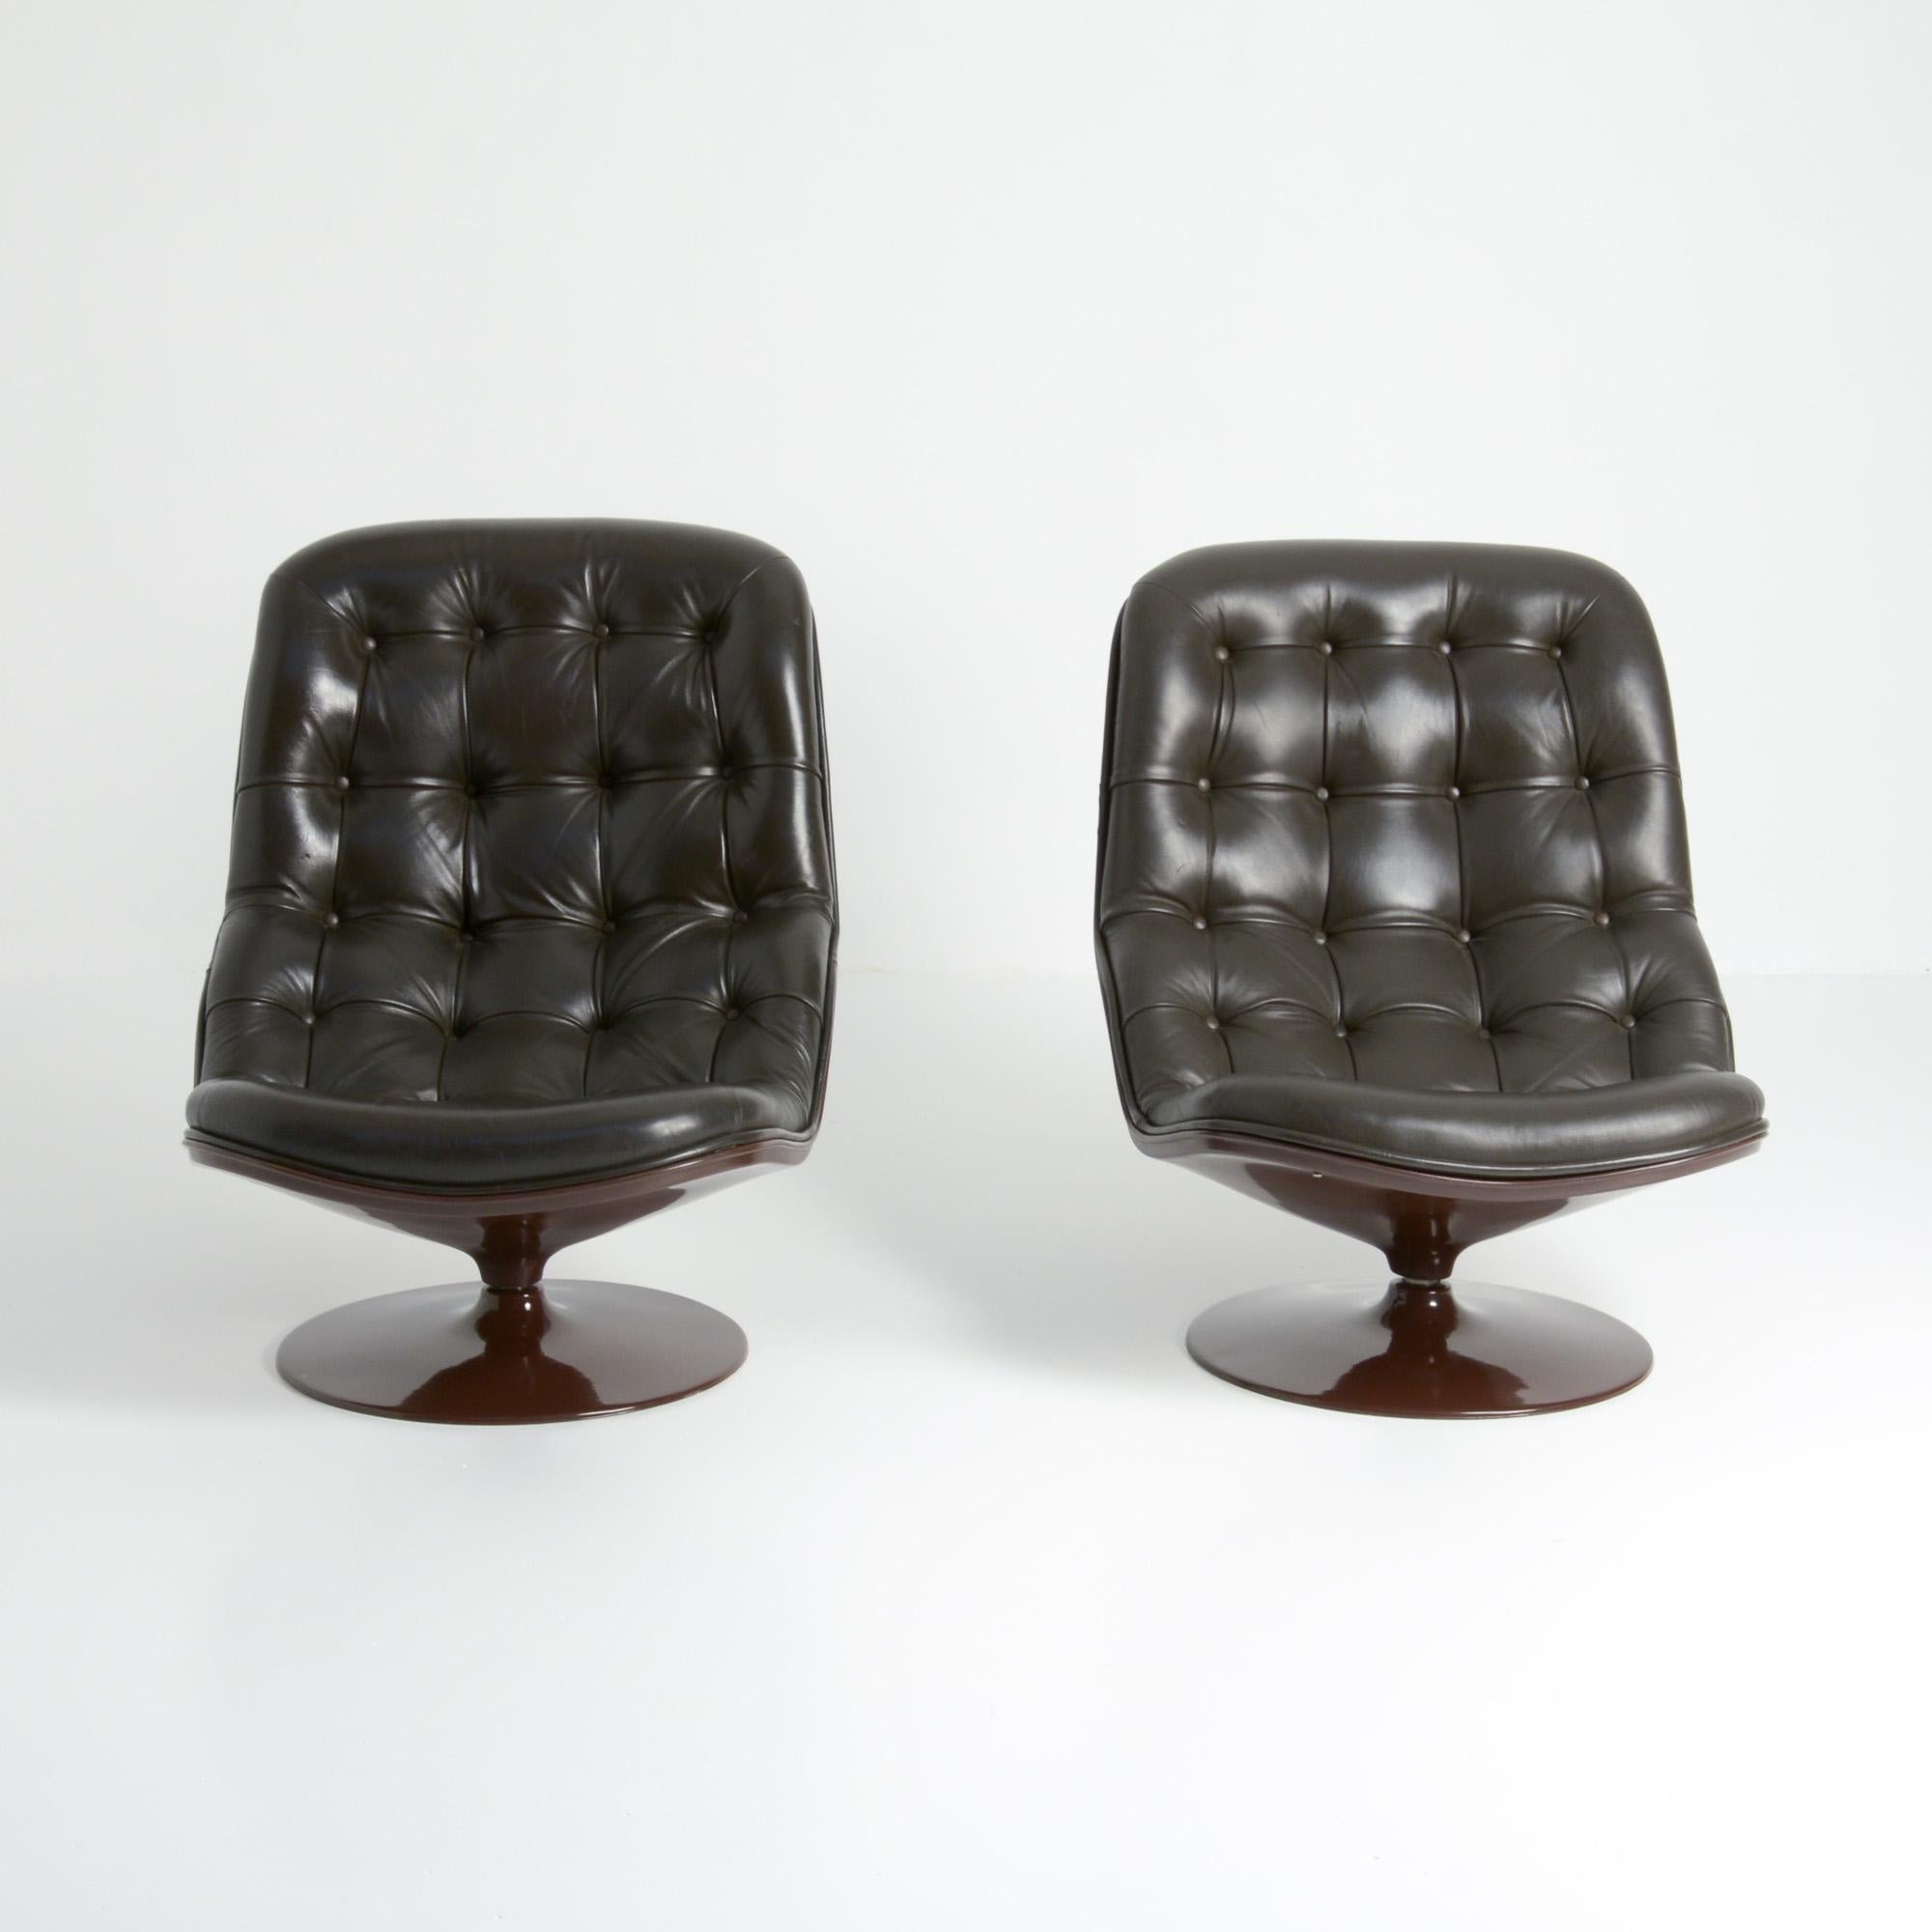 Modern Pair of Shelby Lounge Chairs with Ottoman by Georges Van Rijck for Beaufort